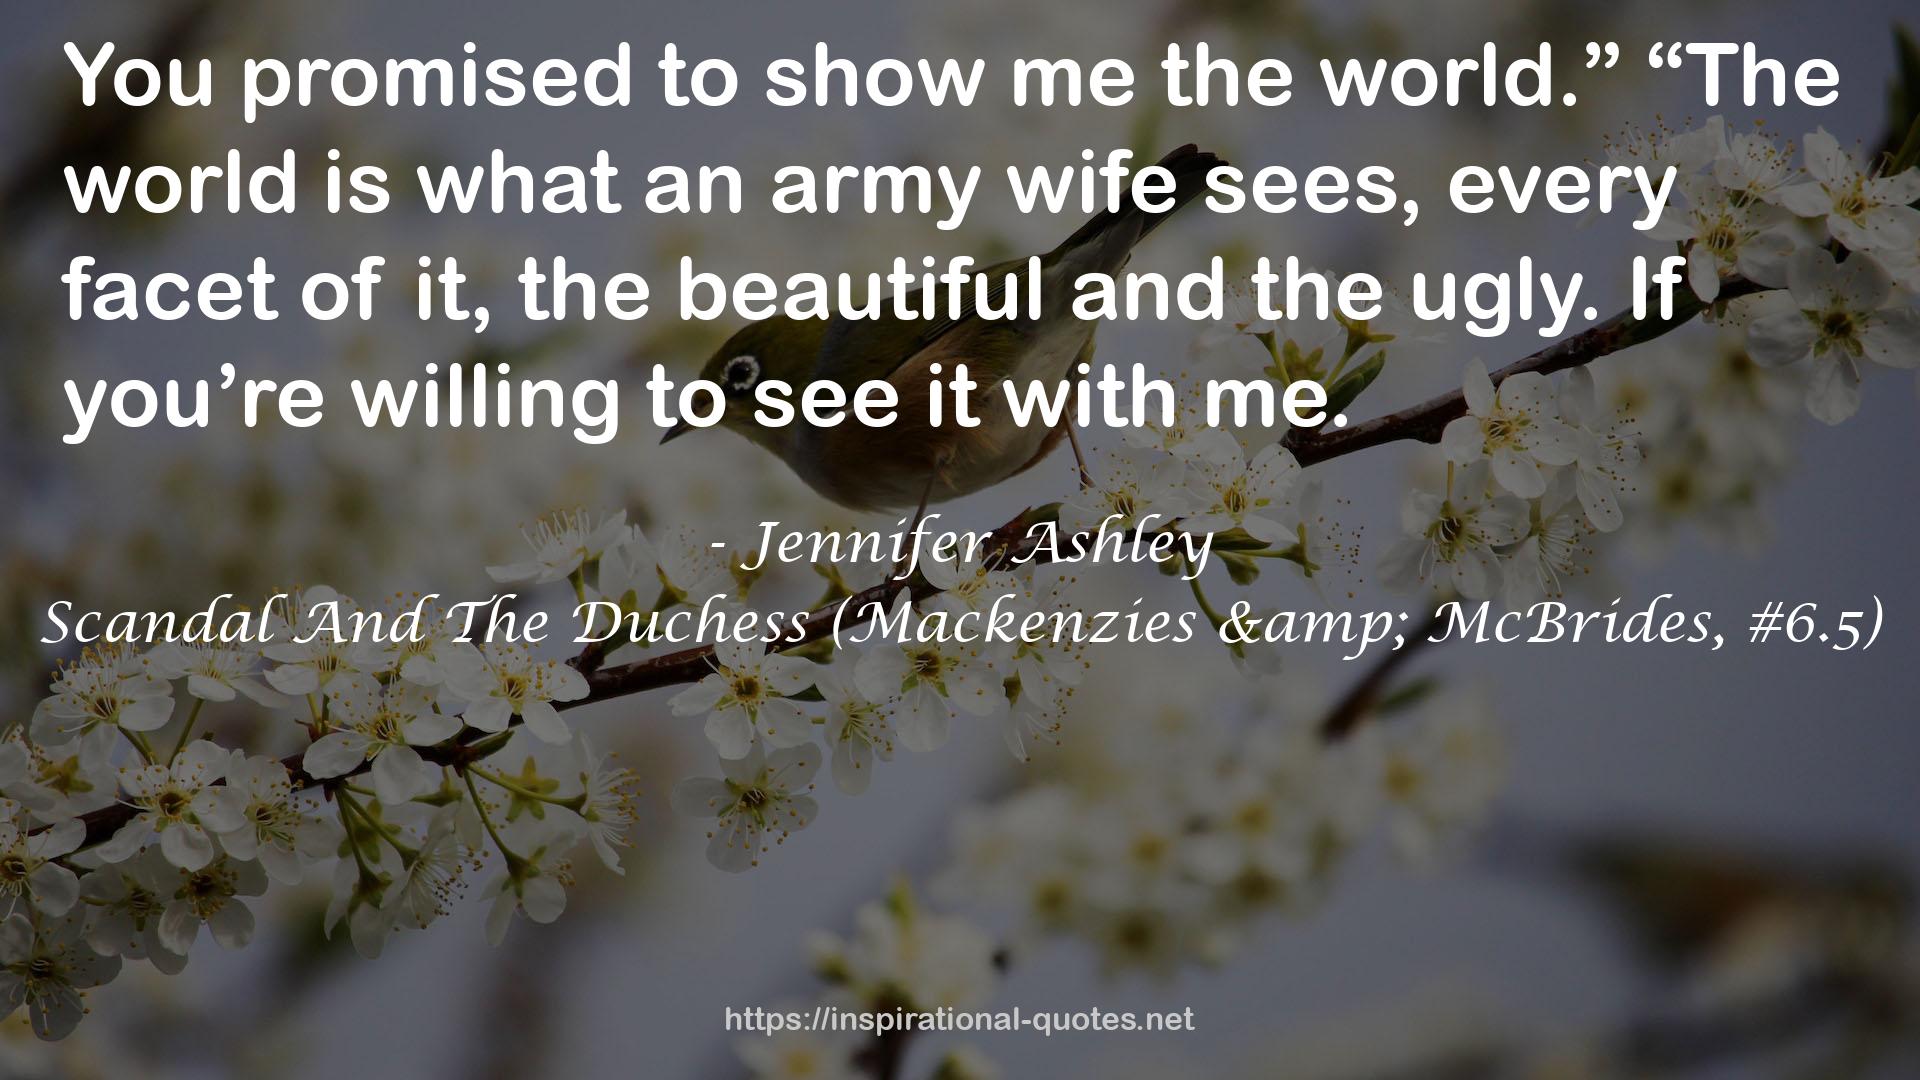 Scandal And The Duchess (Mackenzies & McBrides, #6.5) QUOTES